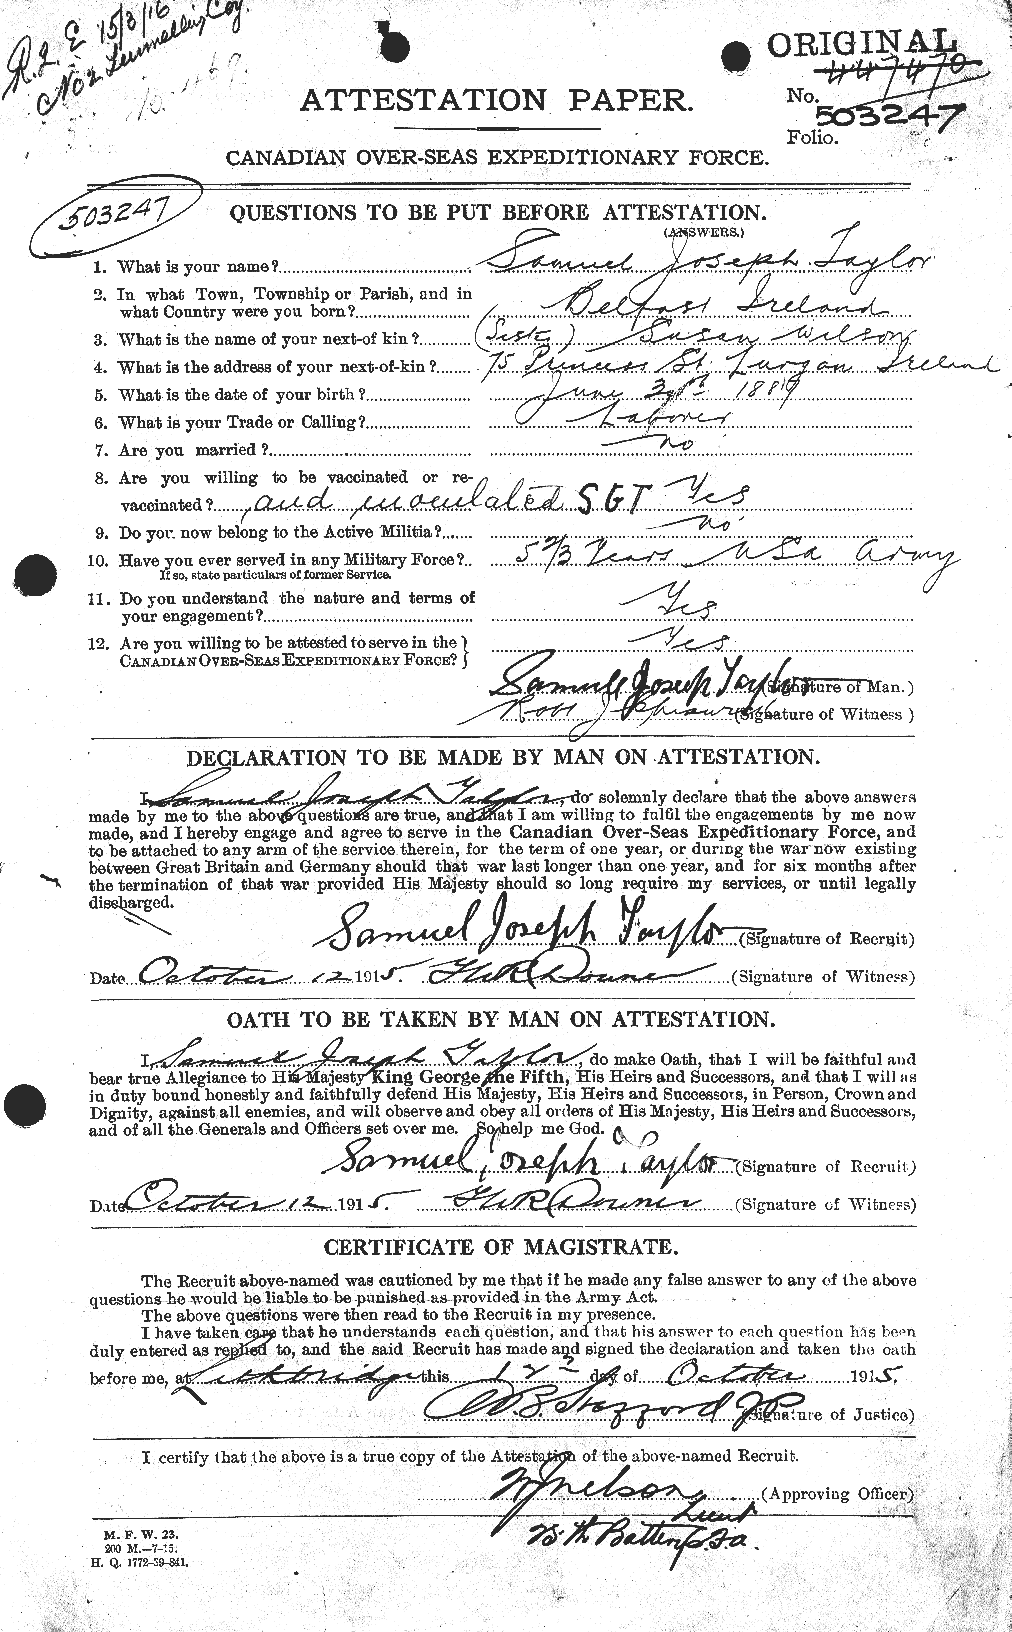 Personnel Records of the First World War - CEF 627880a